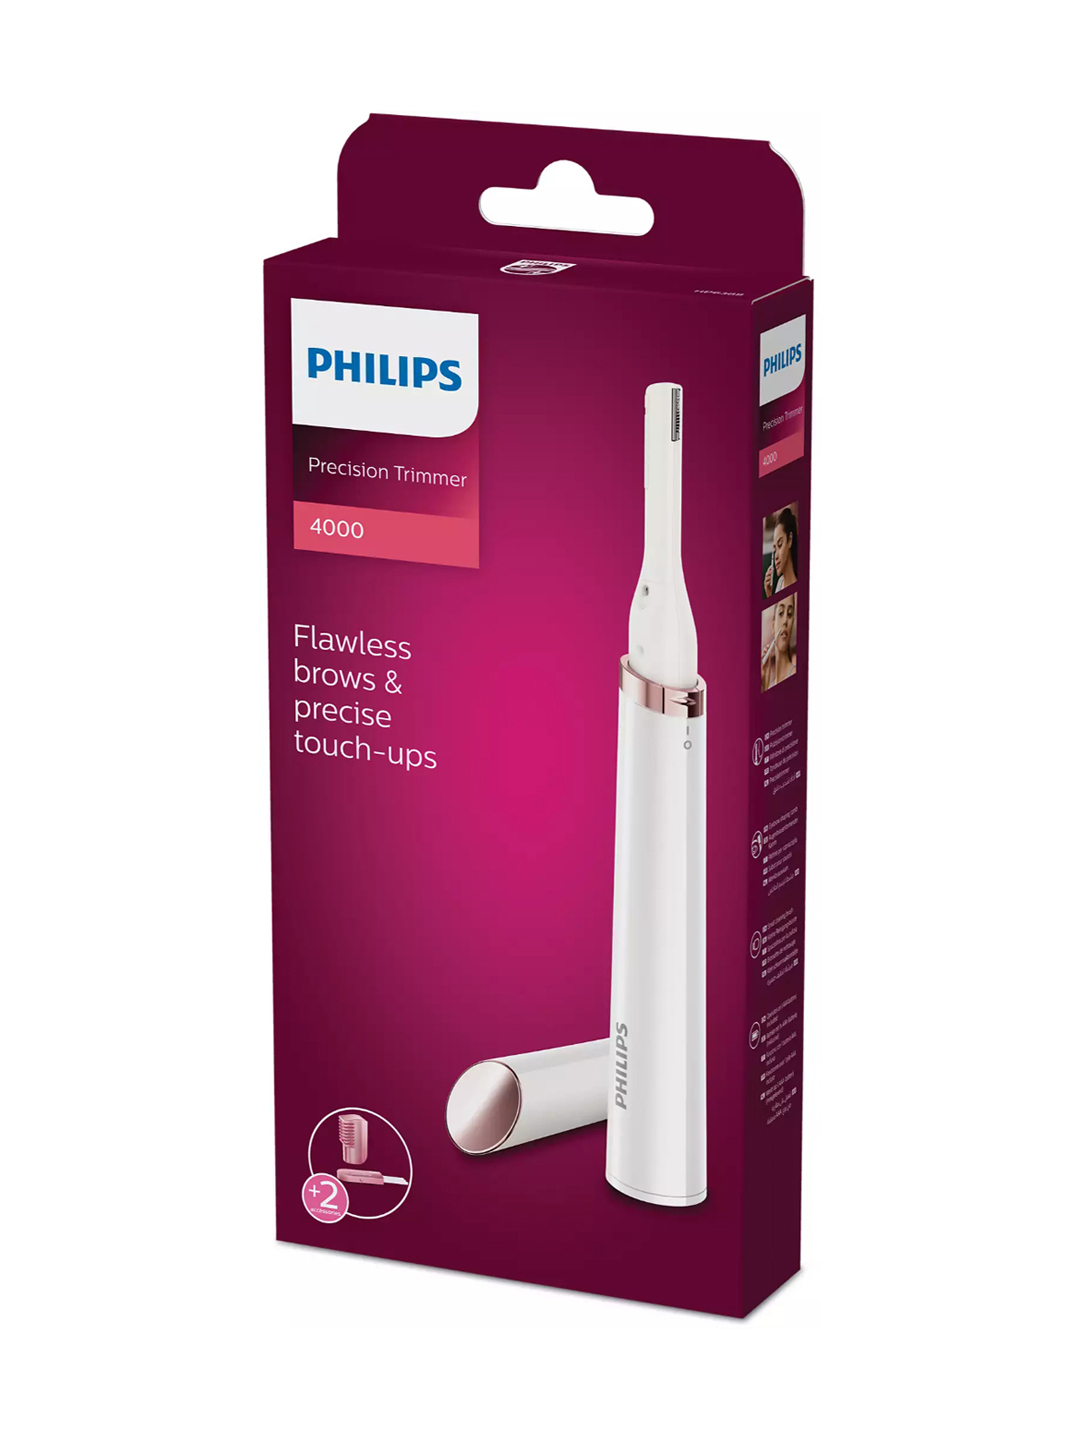 Philips Precision Trimmer (HP6388/00)